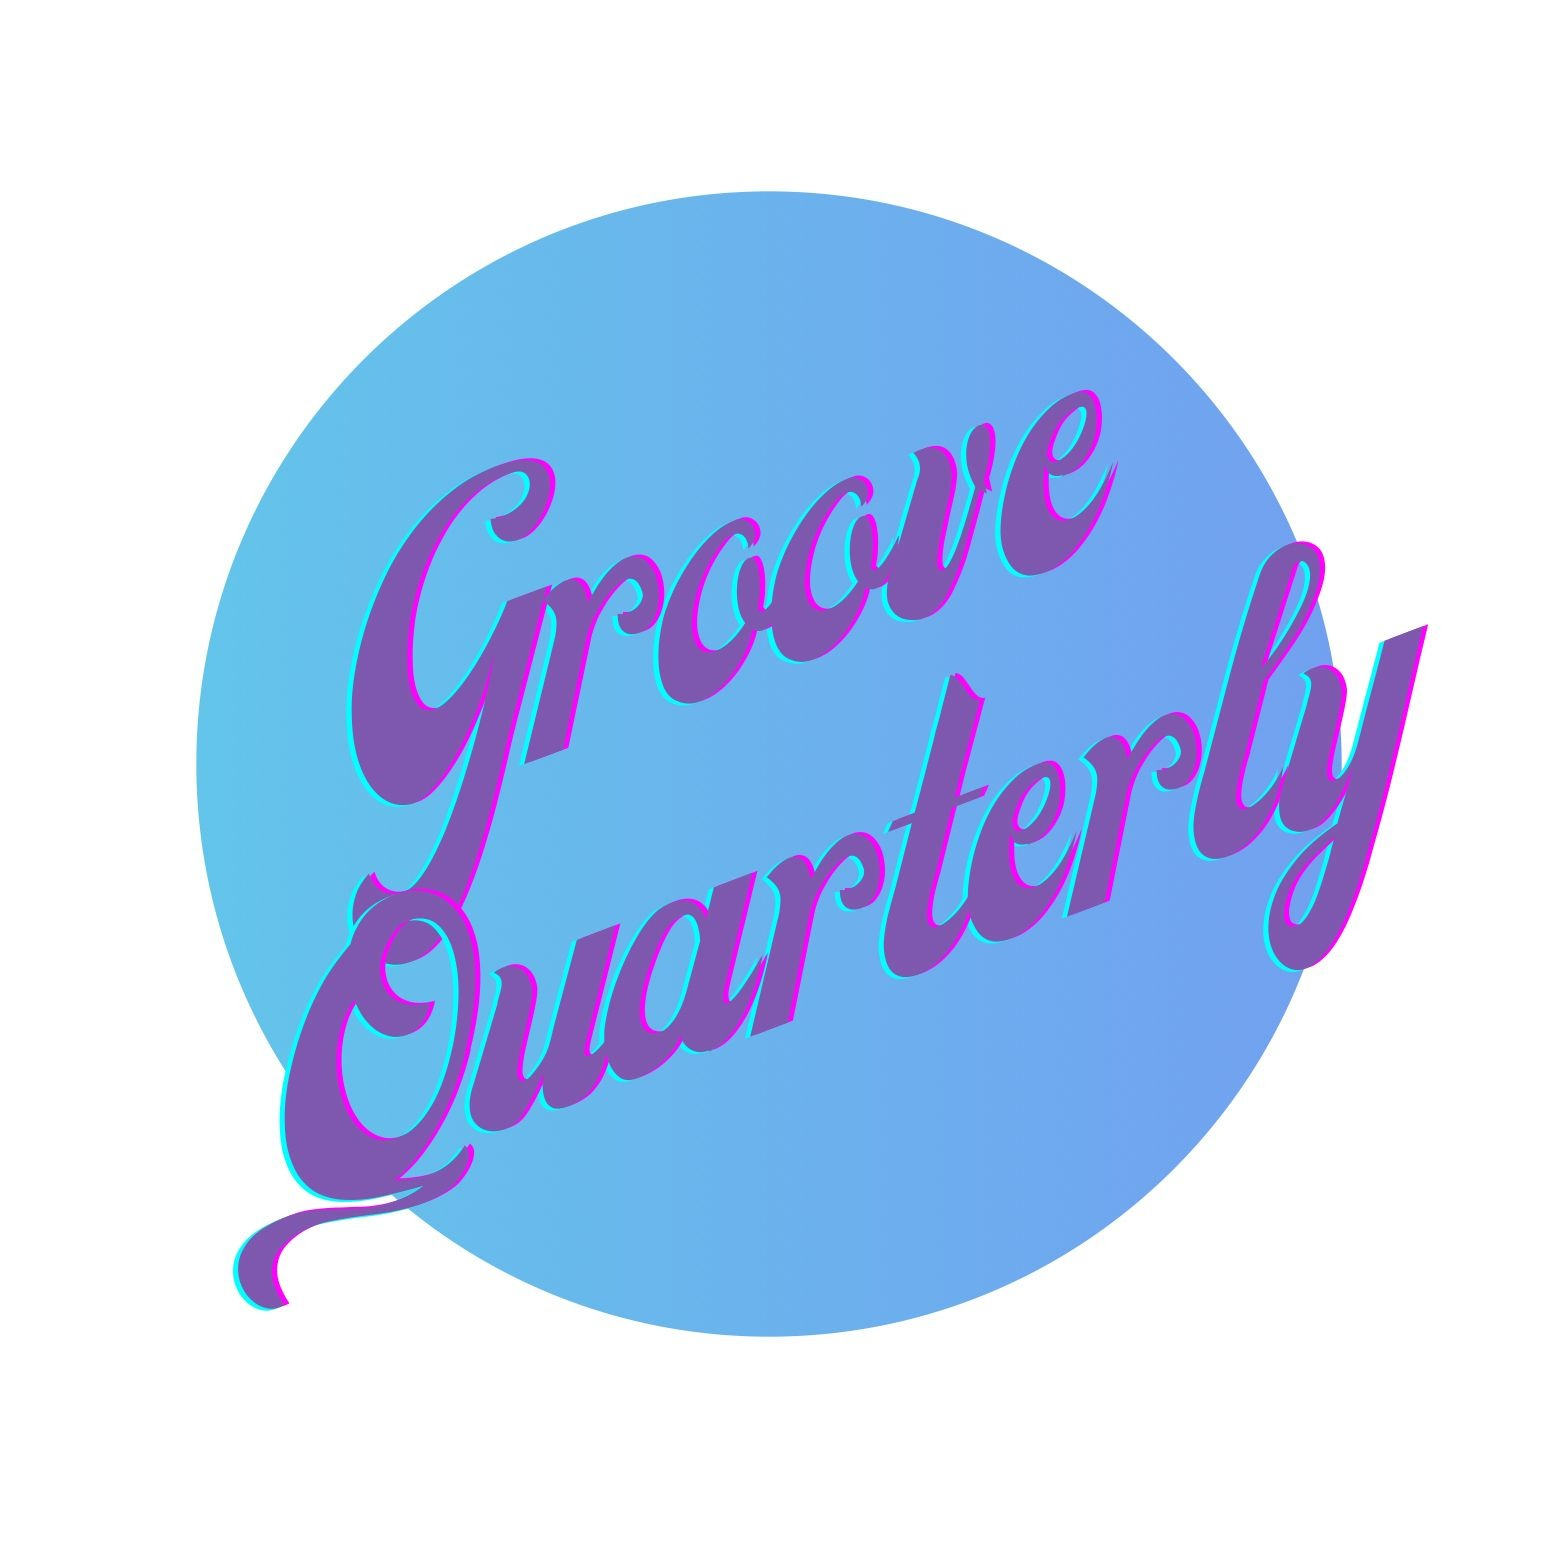 Groove Quarterly - A little bit of soul, hip-hop, and jazz!